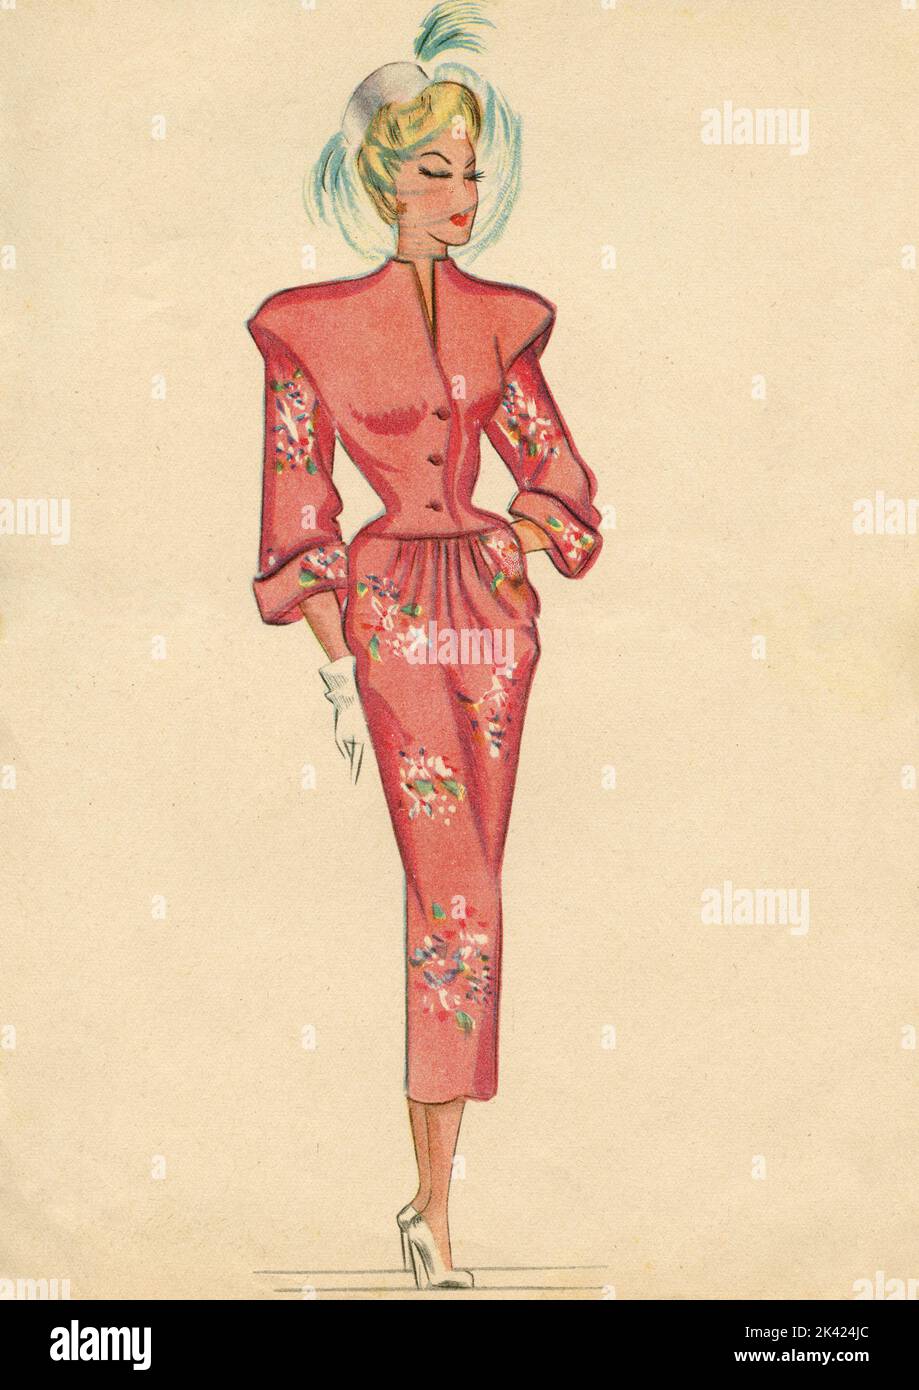 Woman fashion illustration drawing: Sketch of clothes and accessories, Italy 1940s Stock Photo